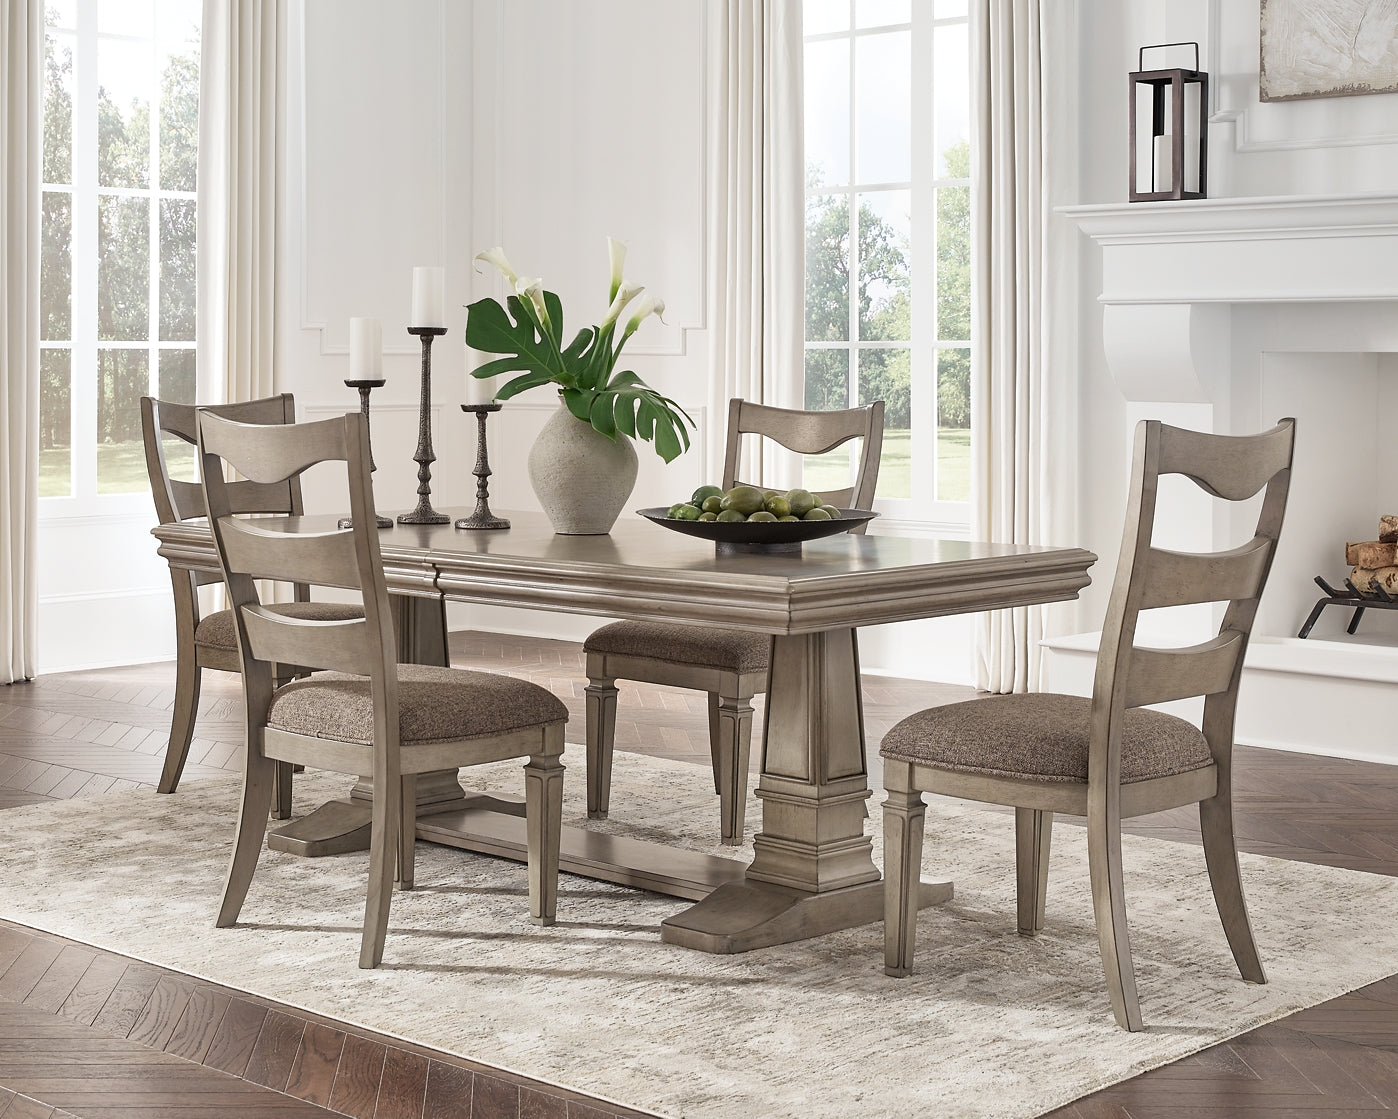 Lexorne Dining Table and 4 Chairs Rent Wise Rent To Own Jacksonville, Florida